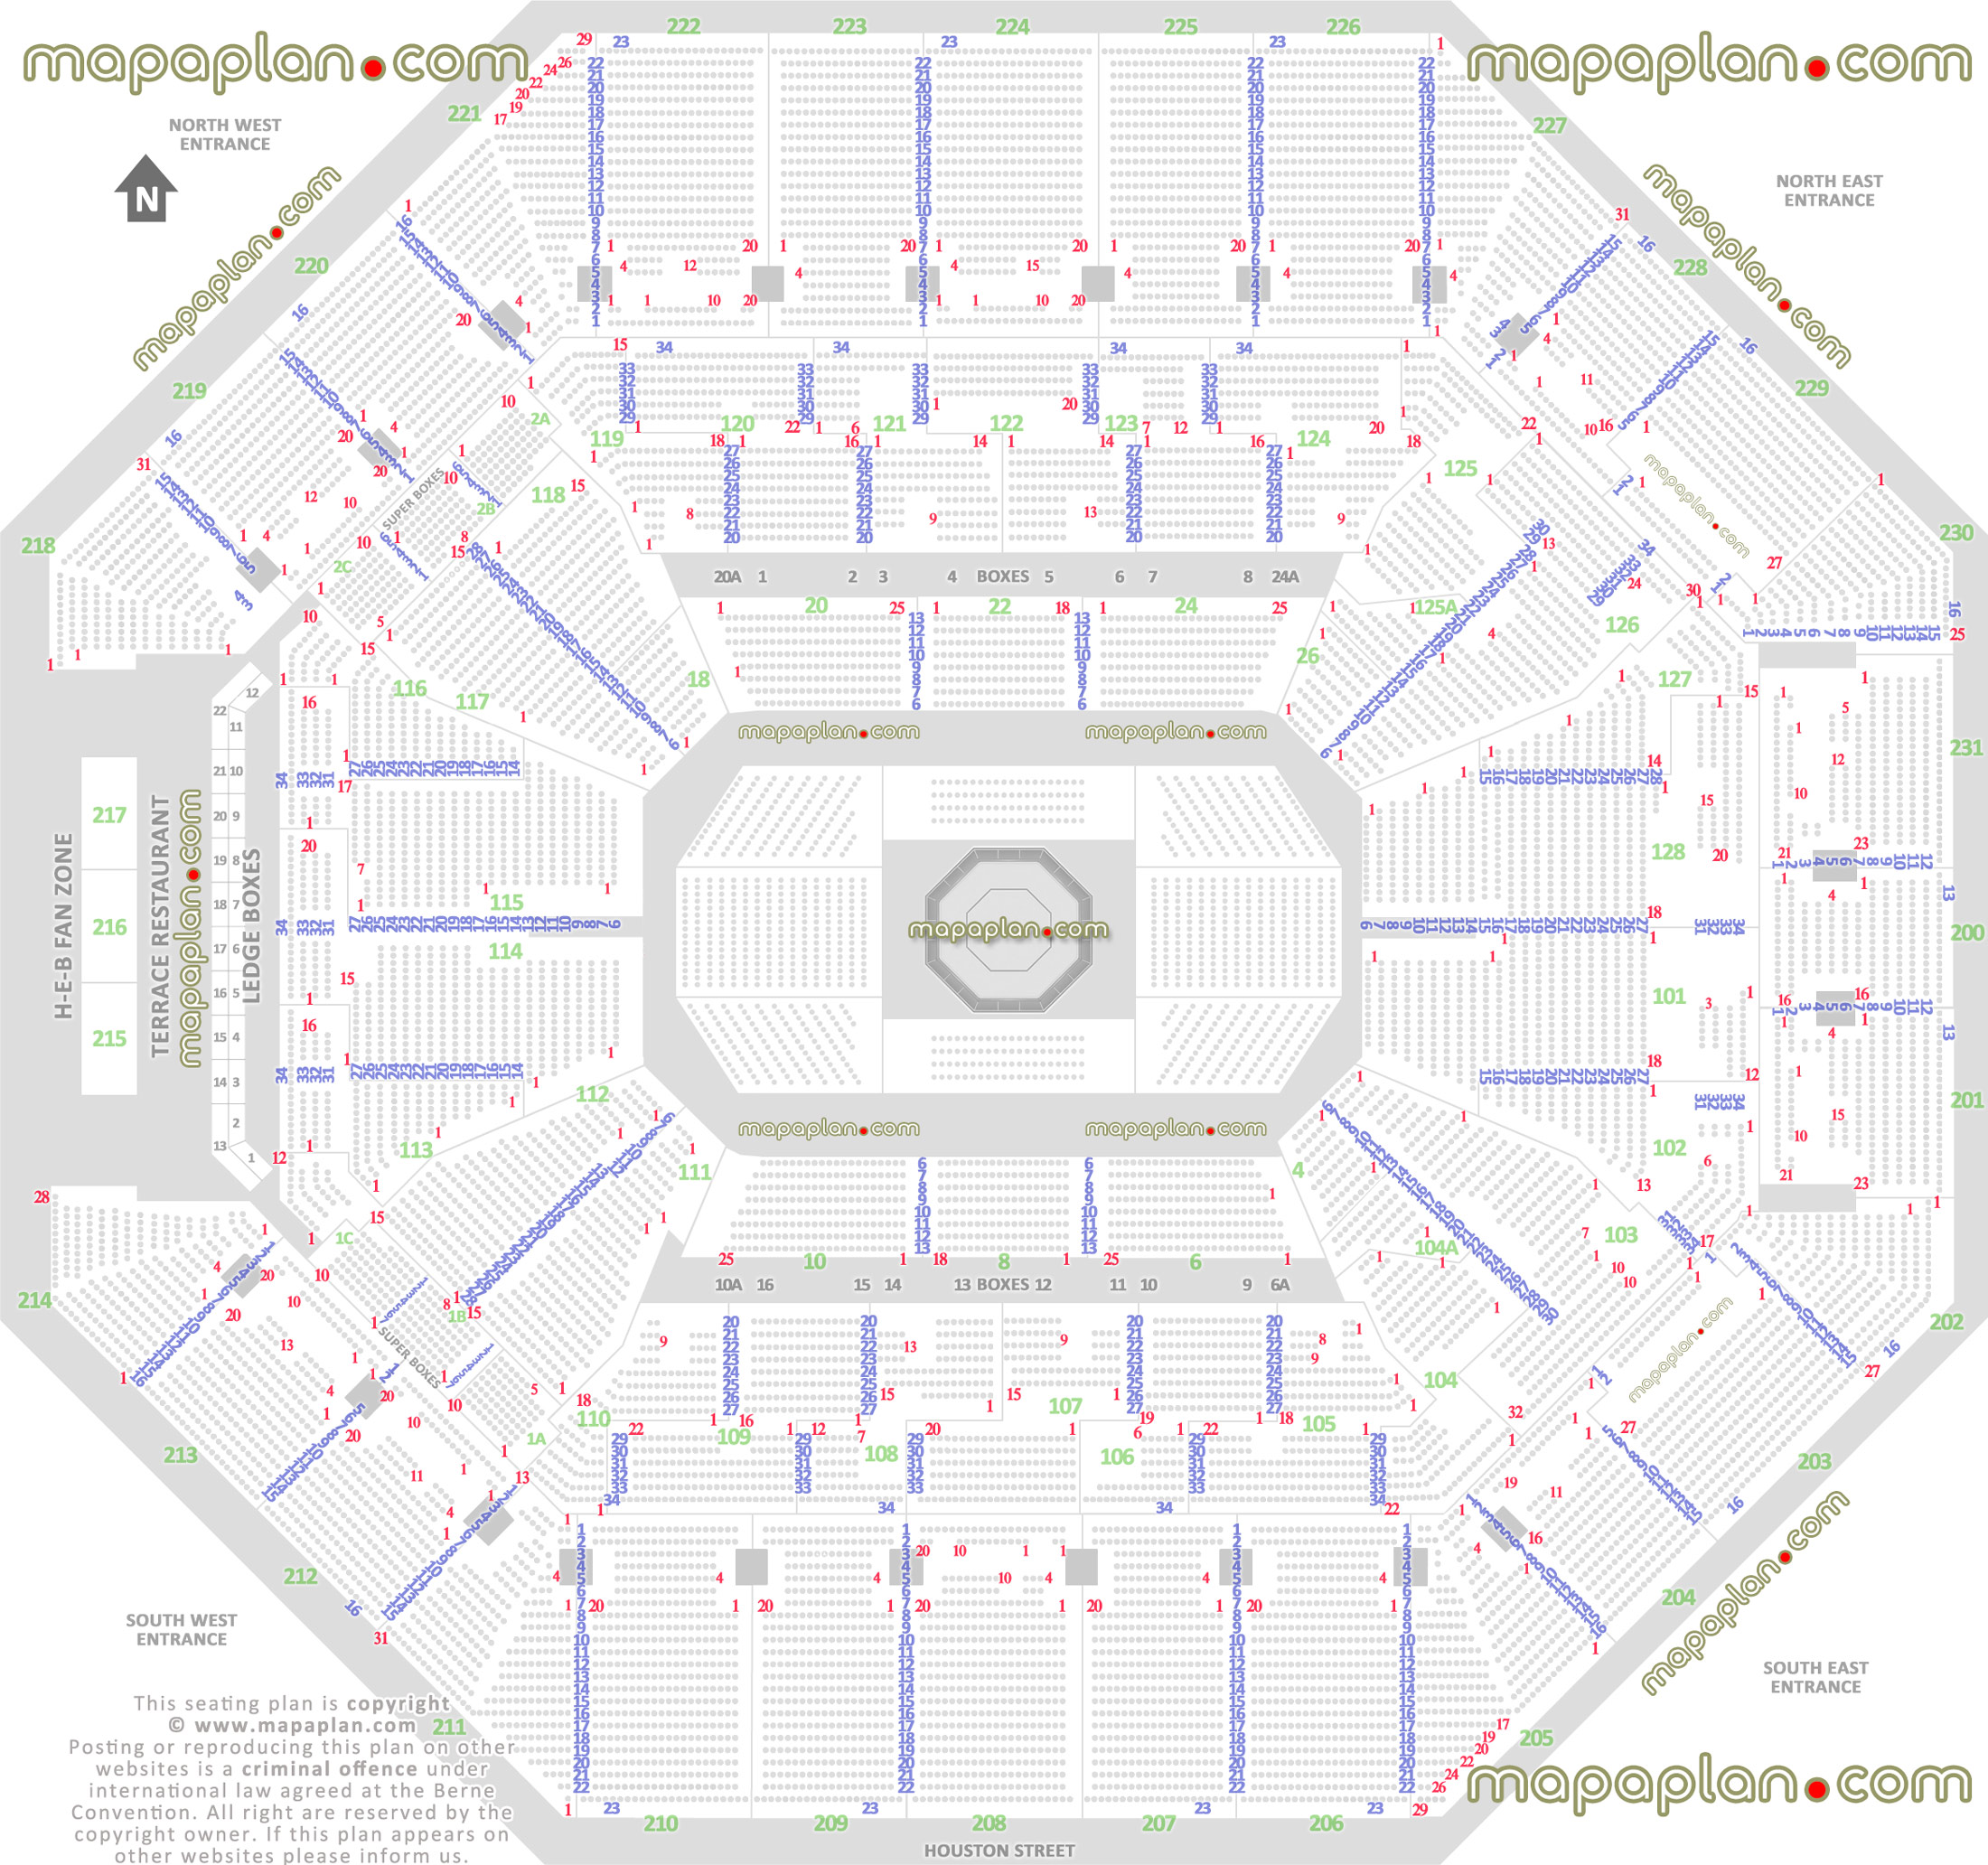 ufc mma fights san antonio tx united states detailed seating capacity arrangement arena row numbers layout west east south north entrance San Antonio Frost Bank Center seating chart